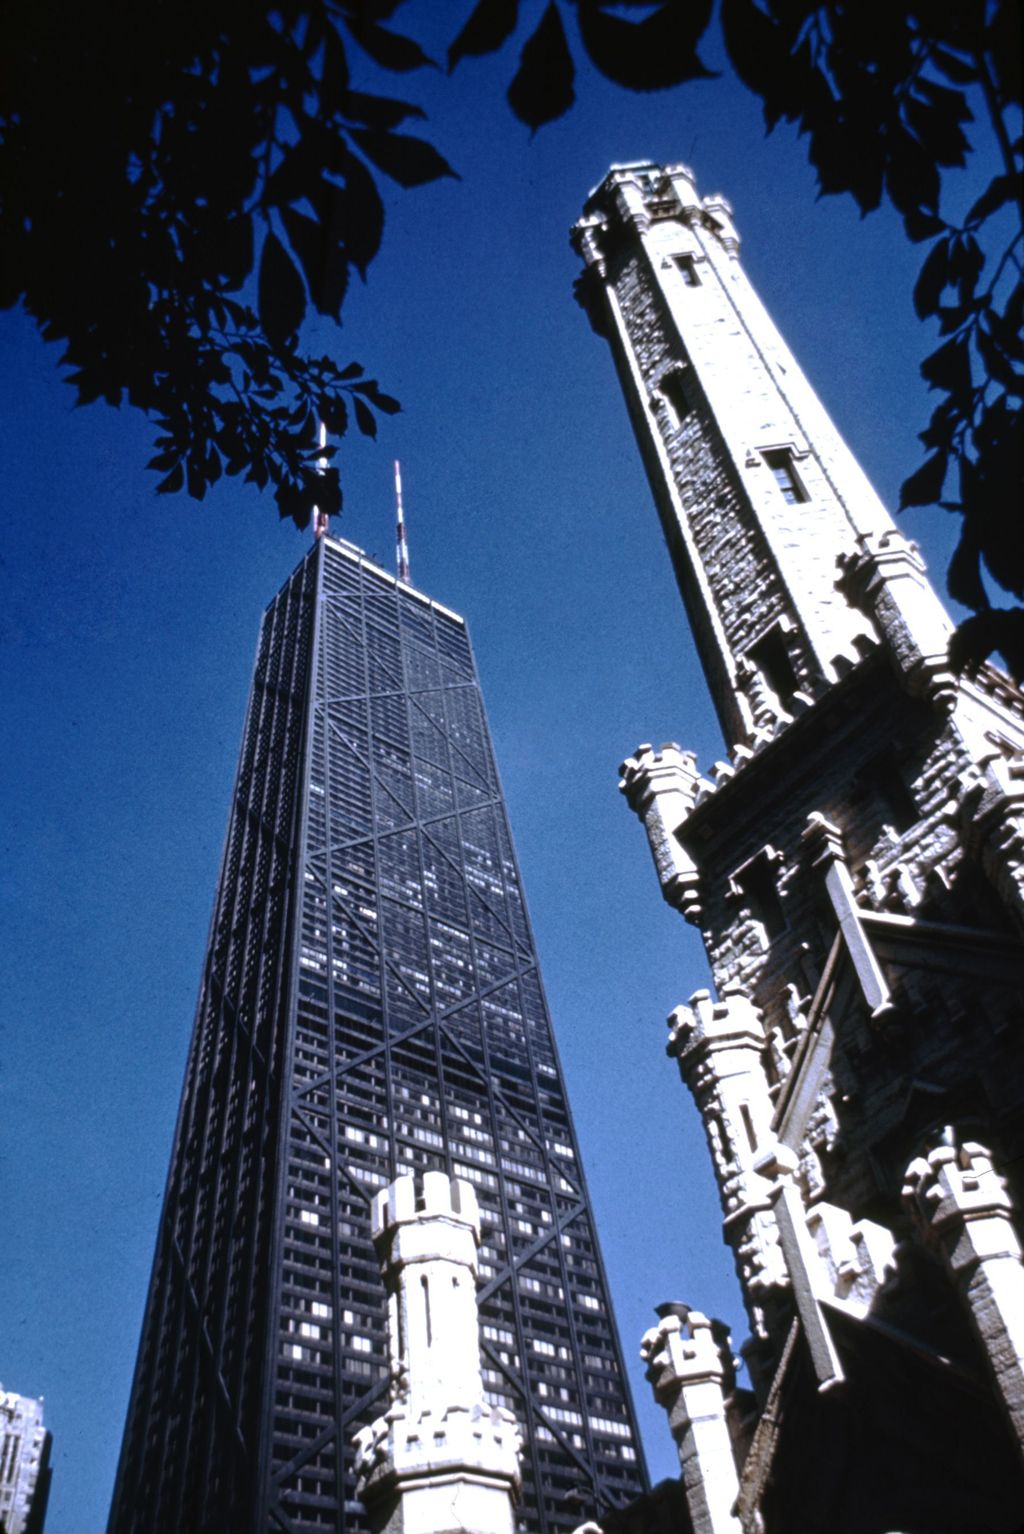 Miniature of John Hancock Center and Chicago Water Tower